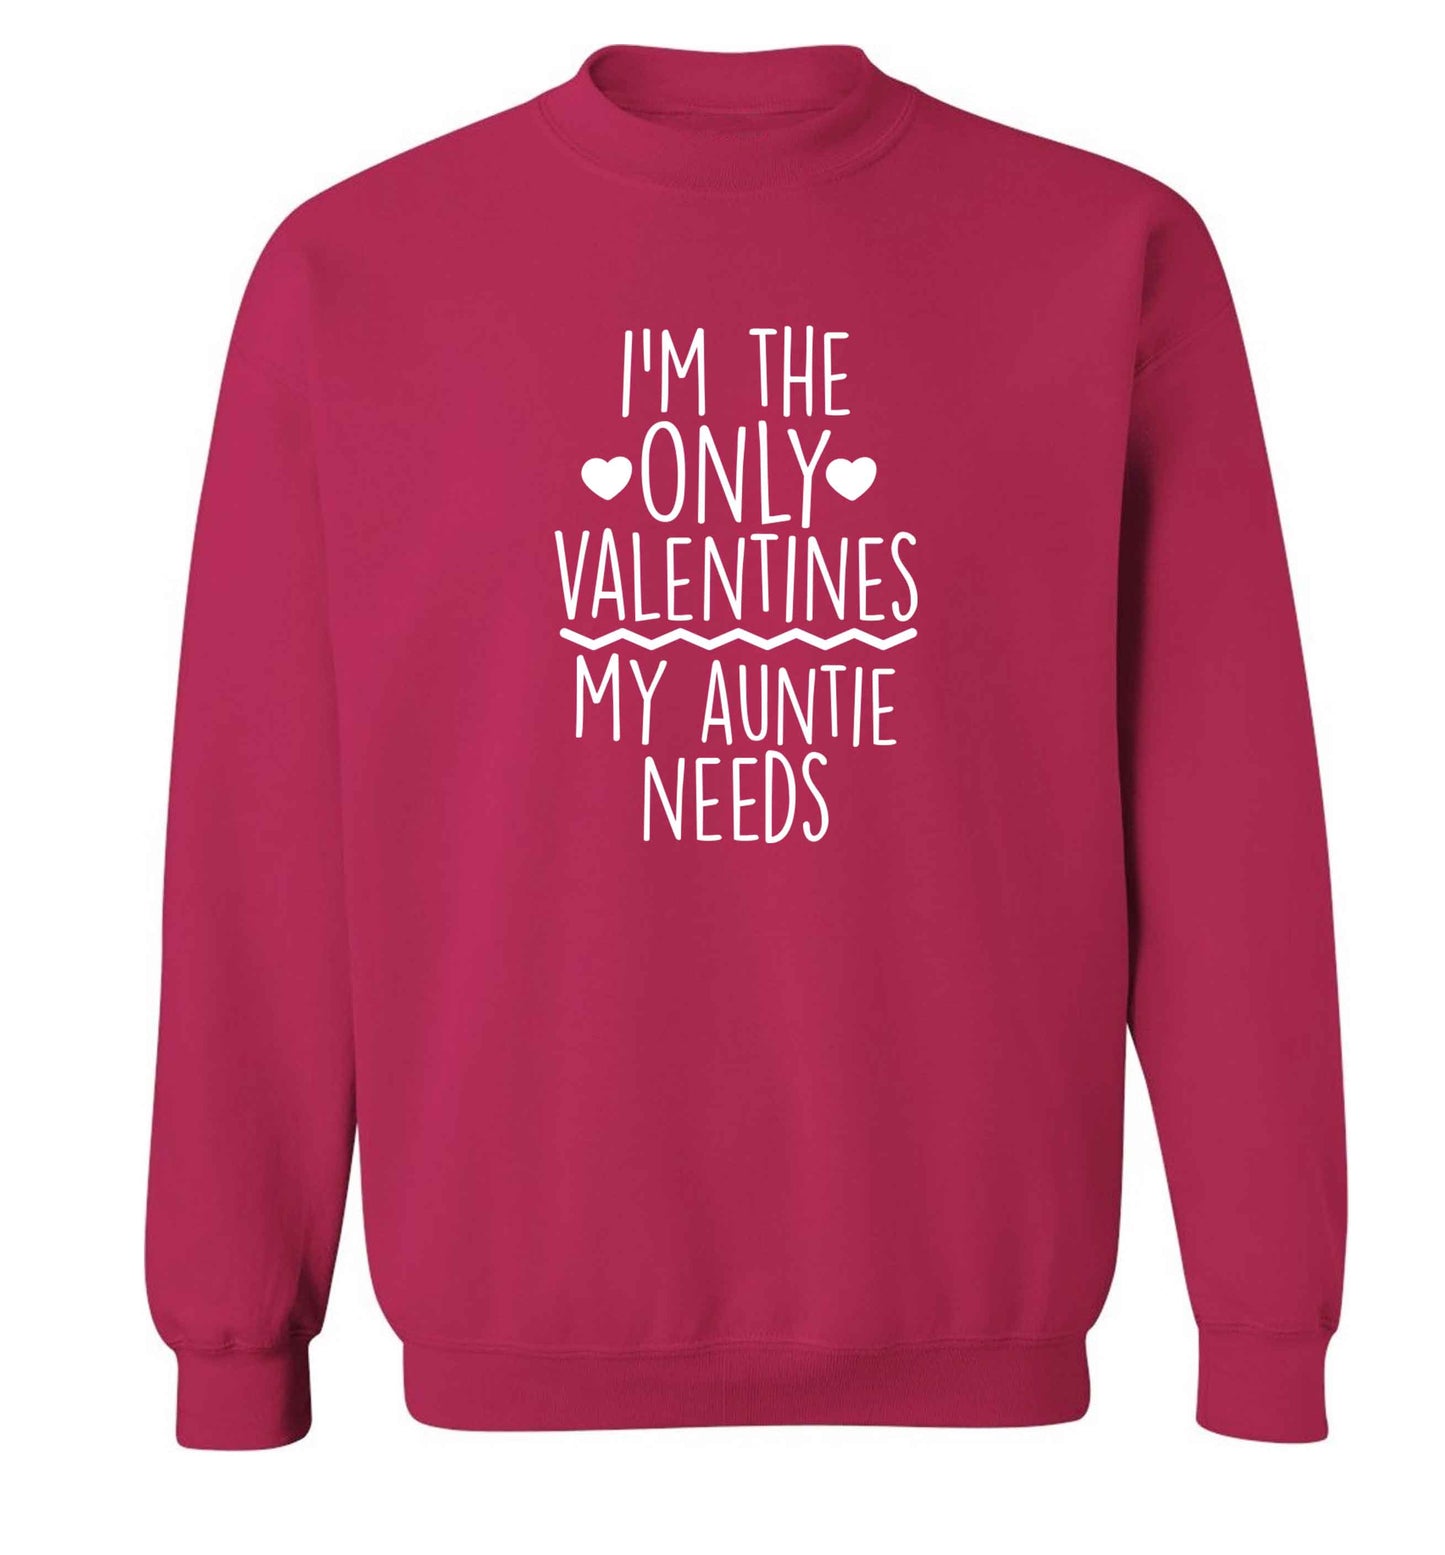 I'm the only valentines my auntie needs adult's unisex pink sweater 2XL